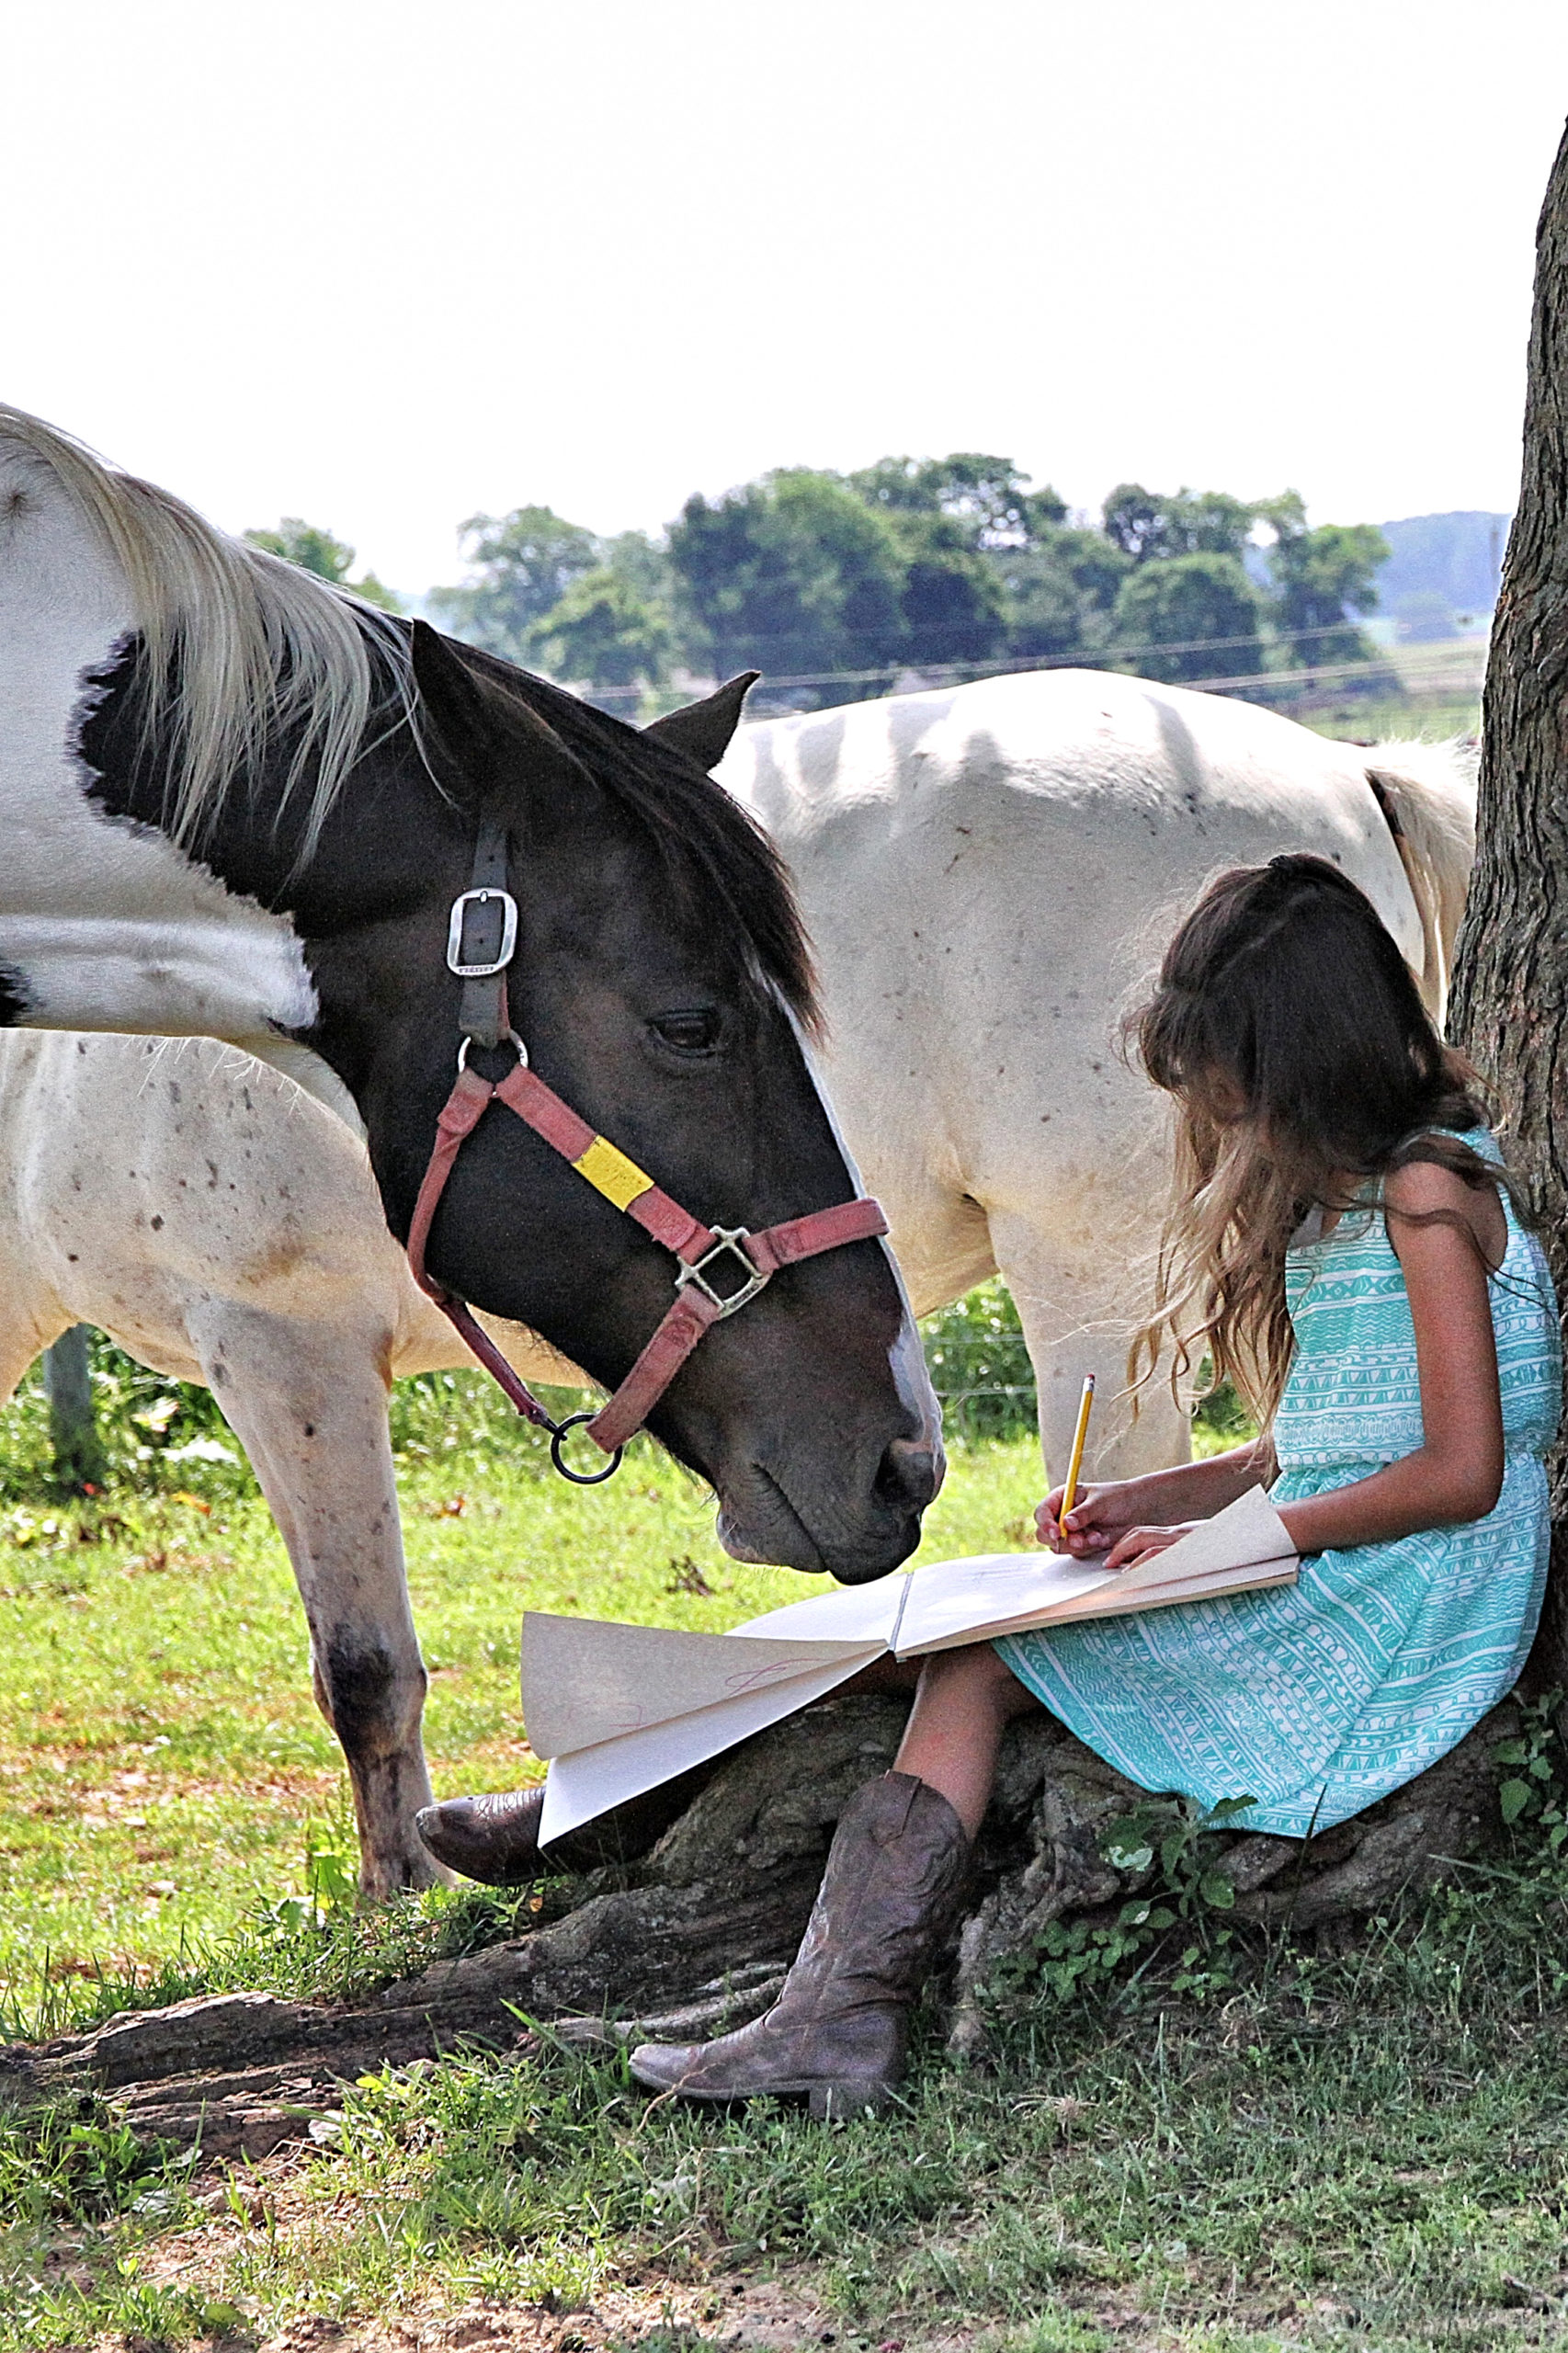 Read to Rescue Horses in Need